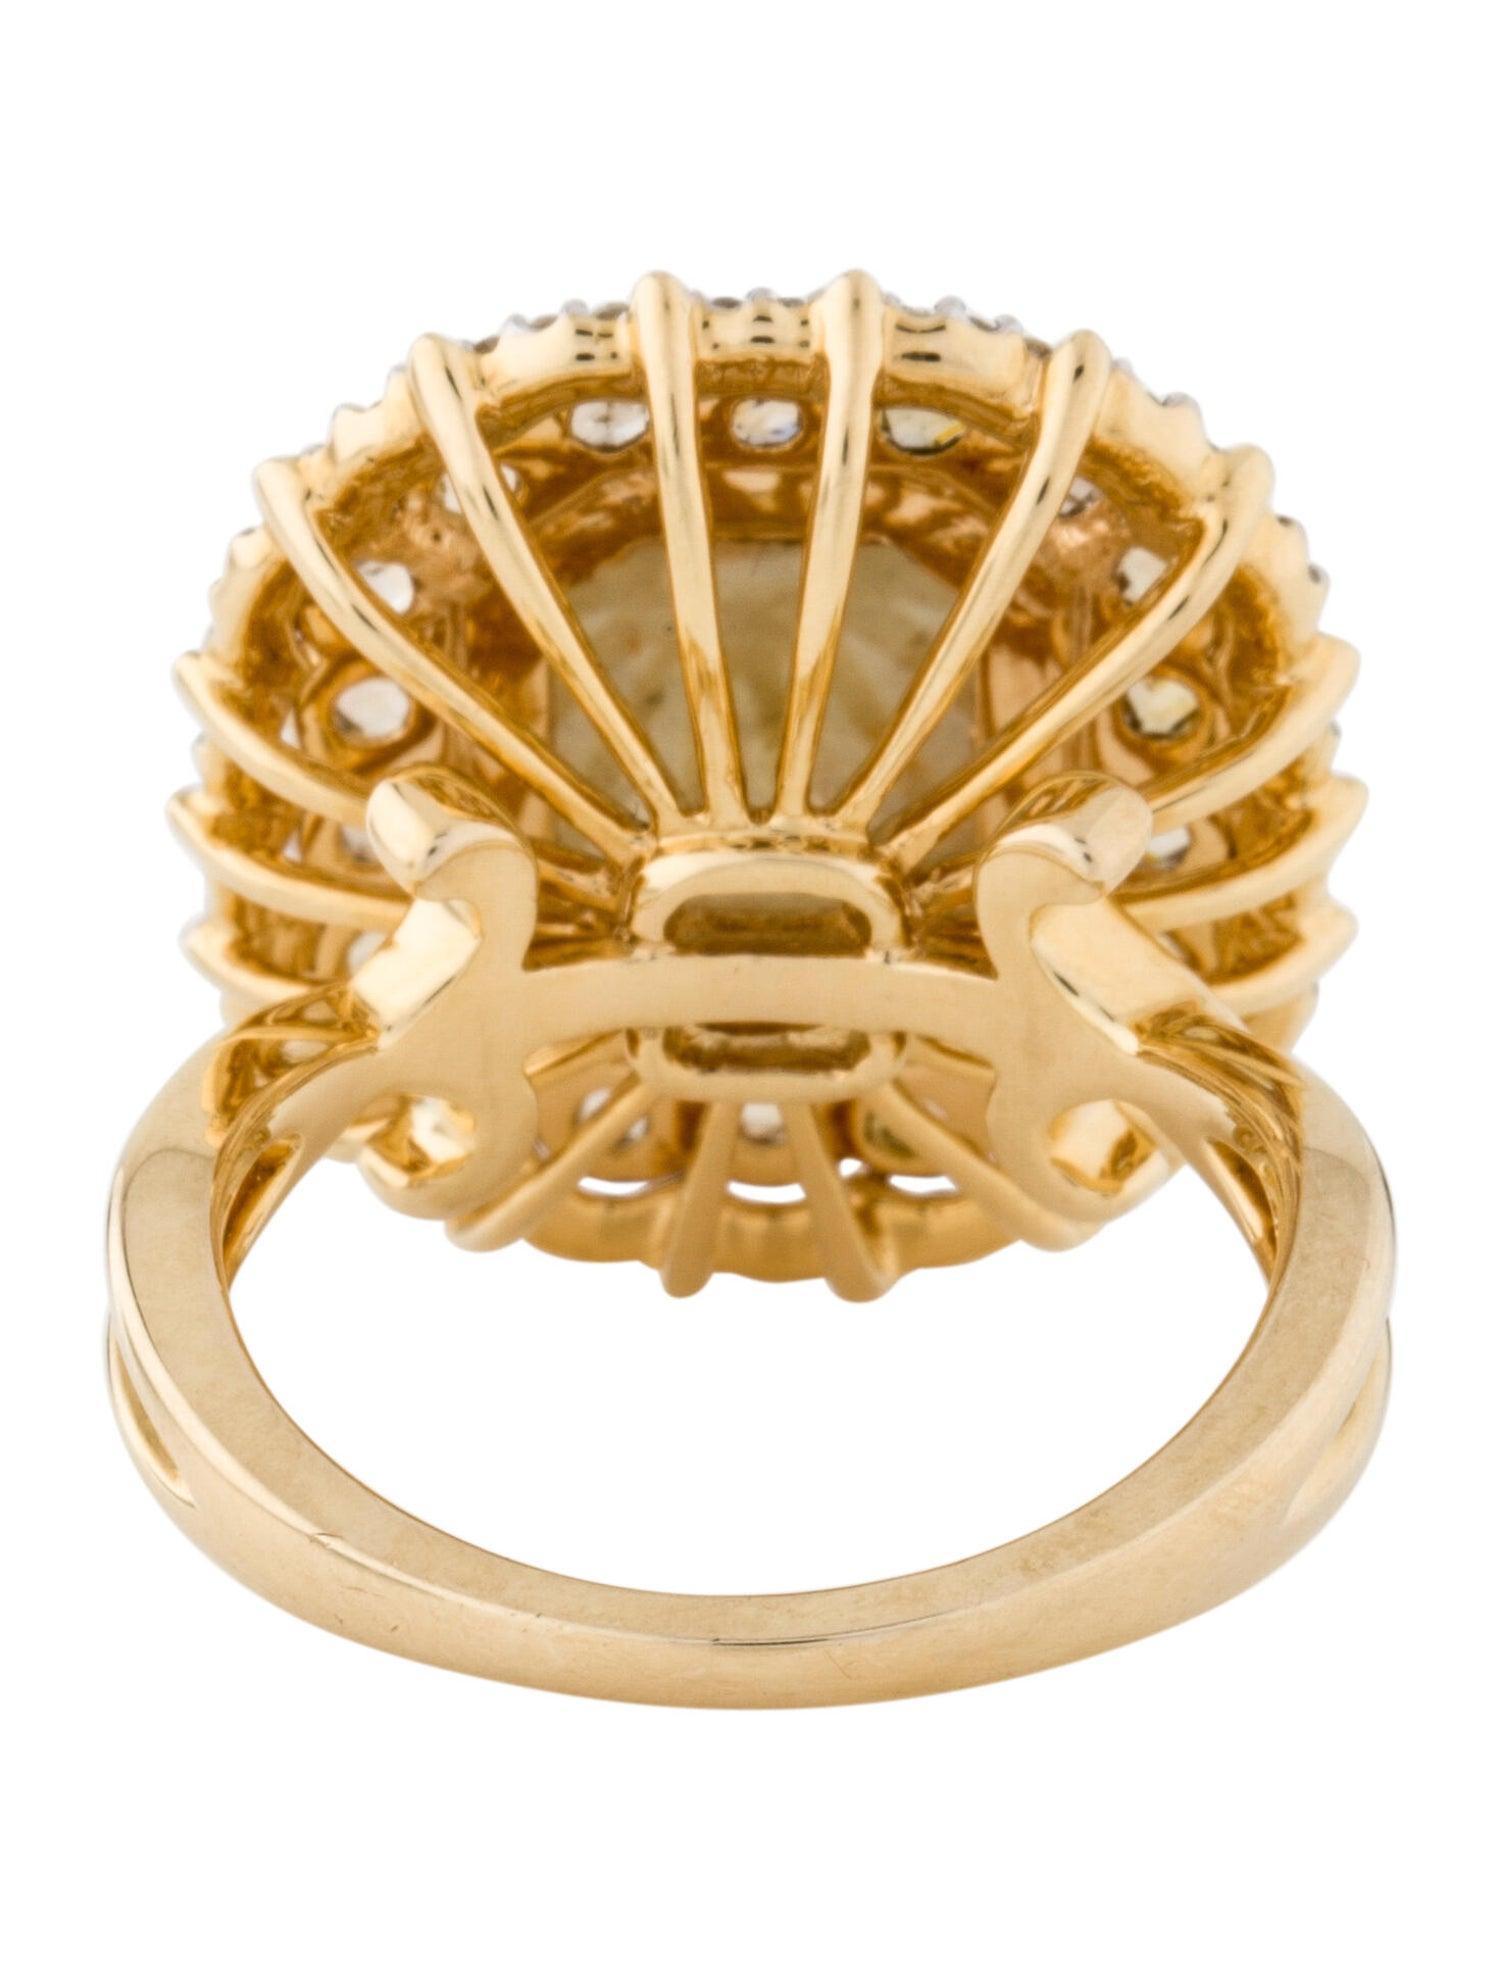 Artisan 14Kt Yellow Gold 4.20ct Diamond Cocktail Ring For Sale